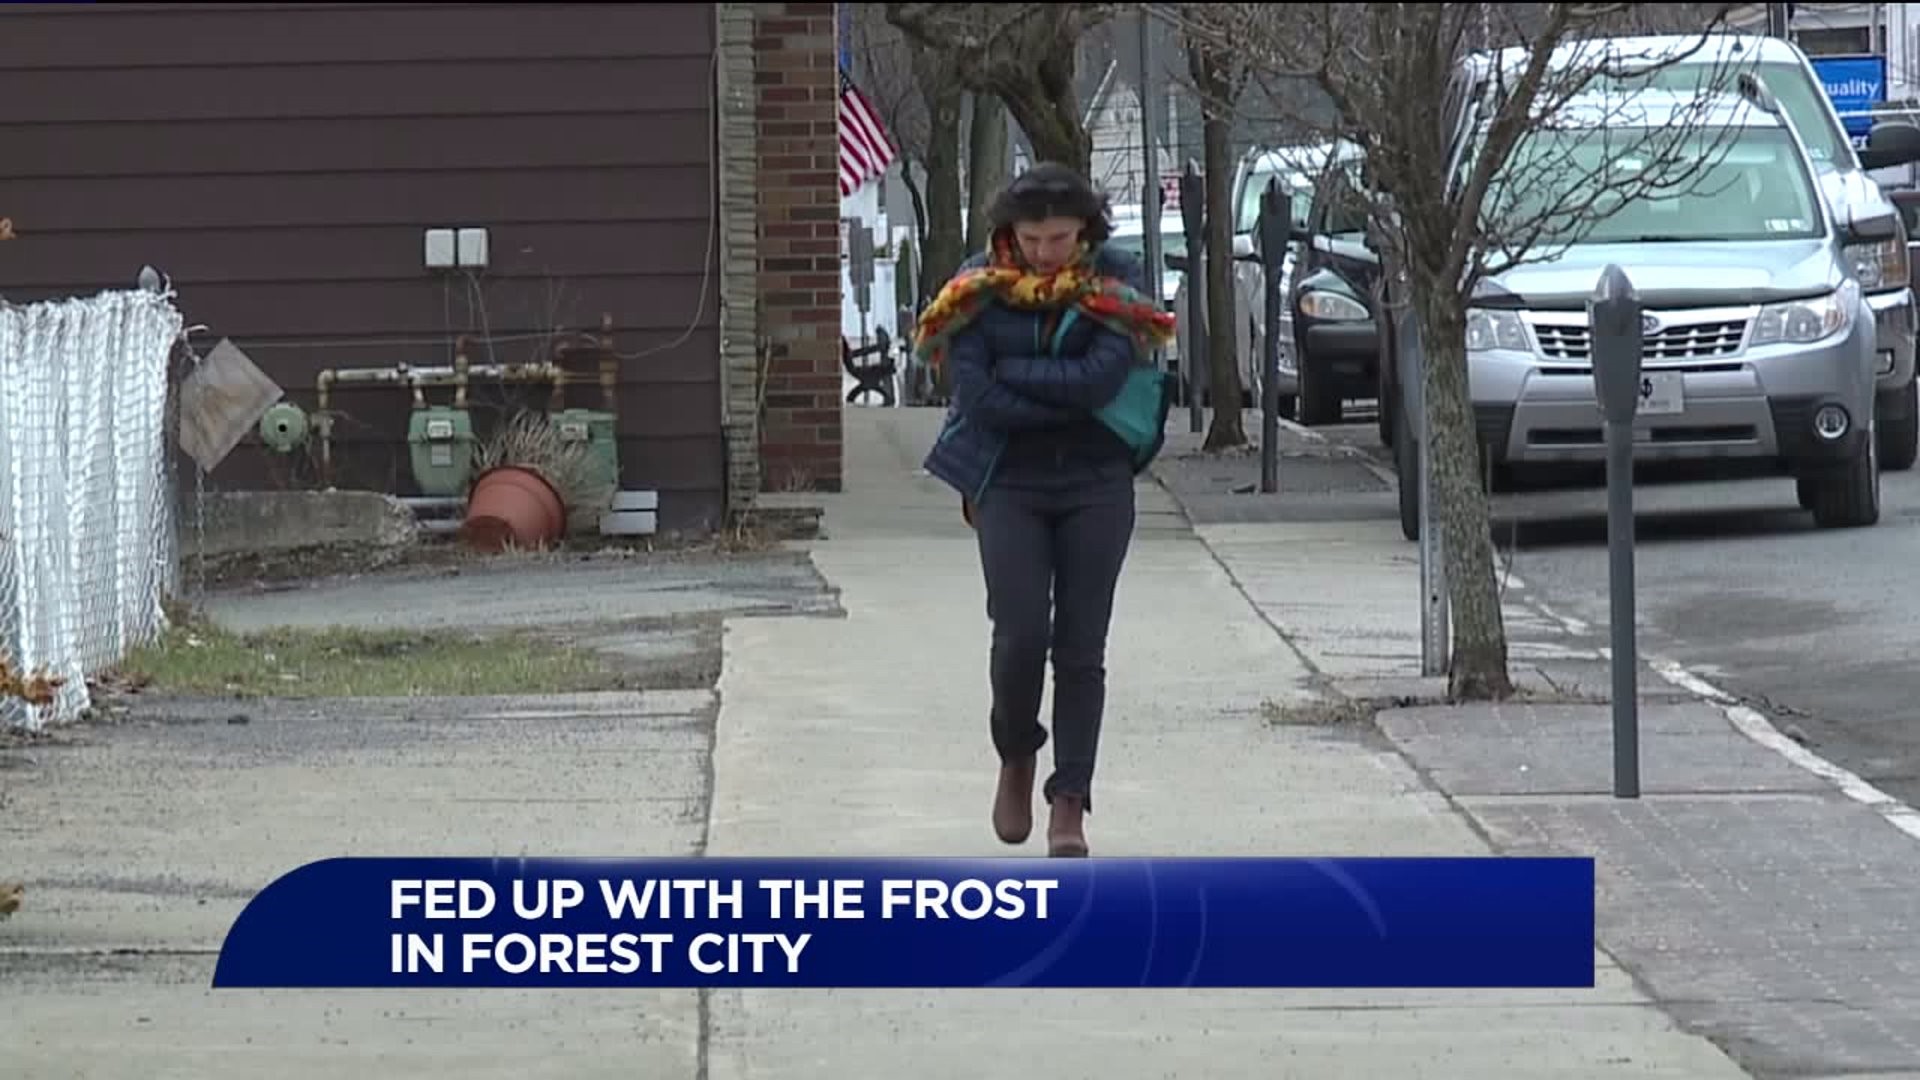 Fed Up with the Frost in Forest City